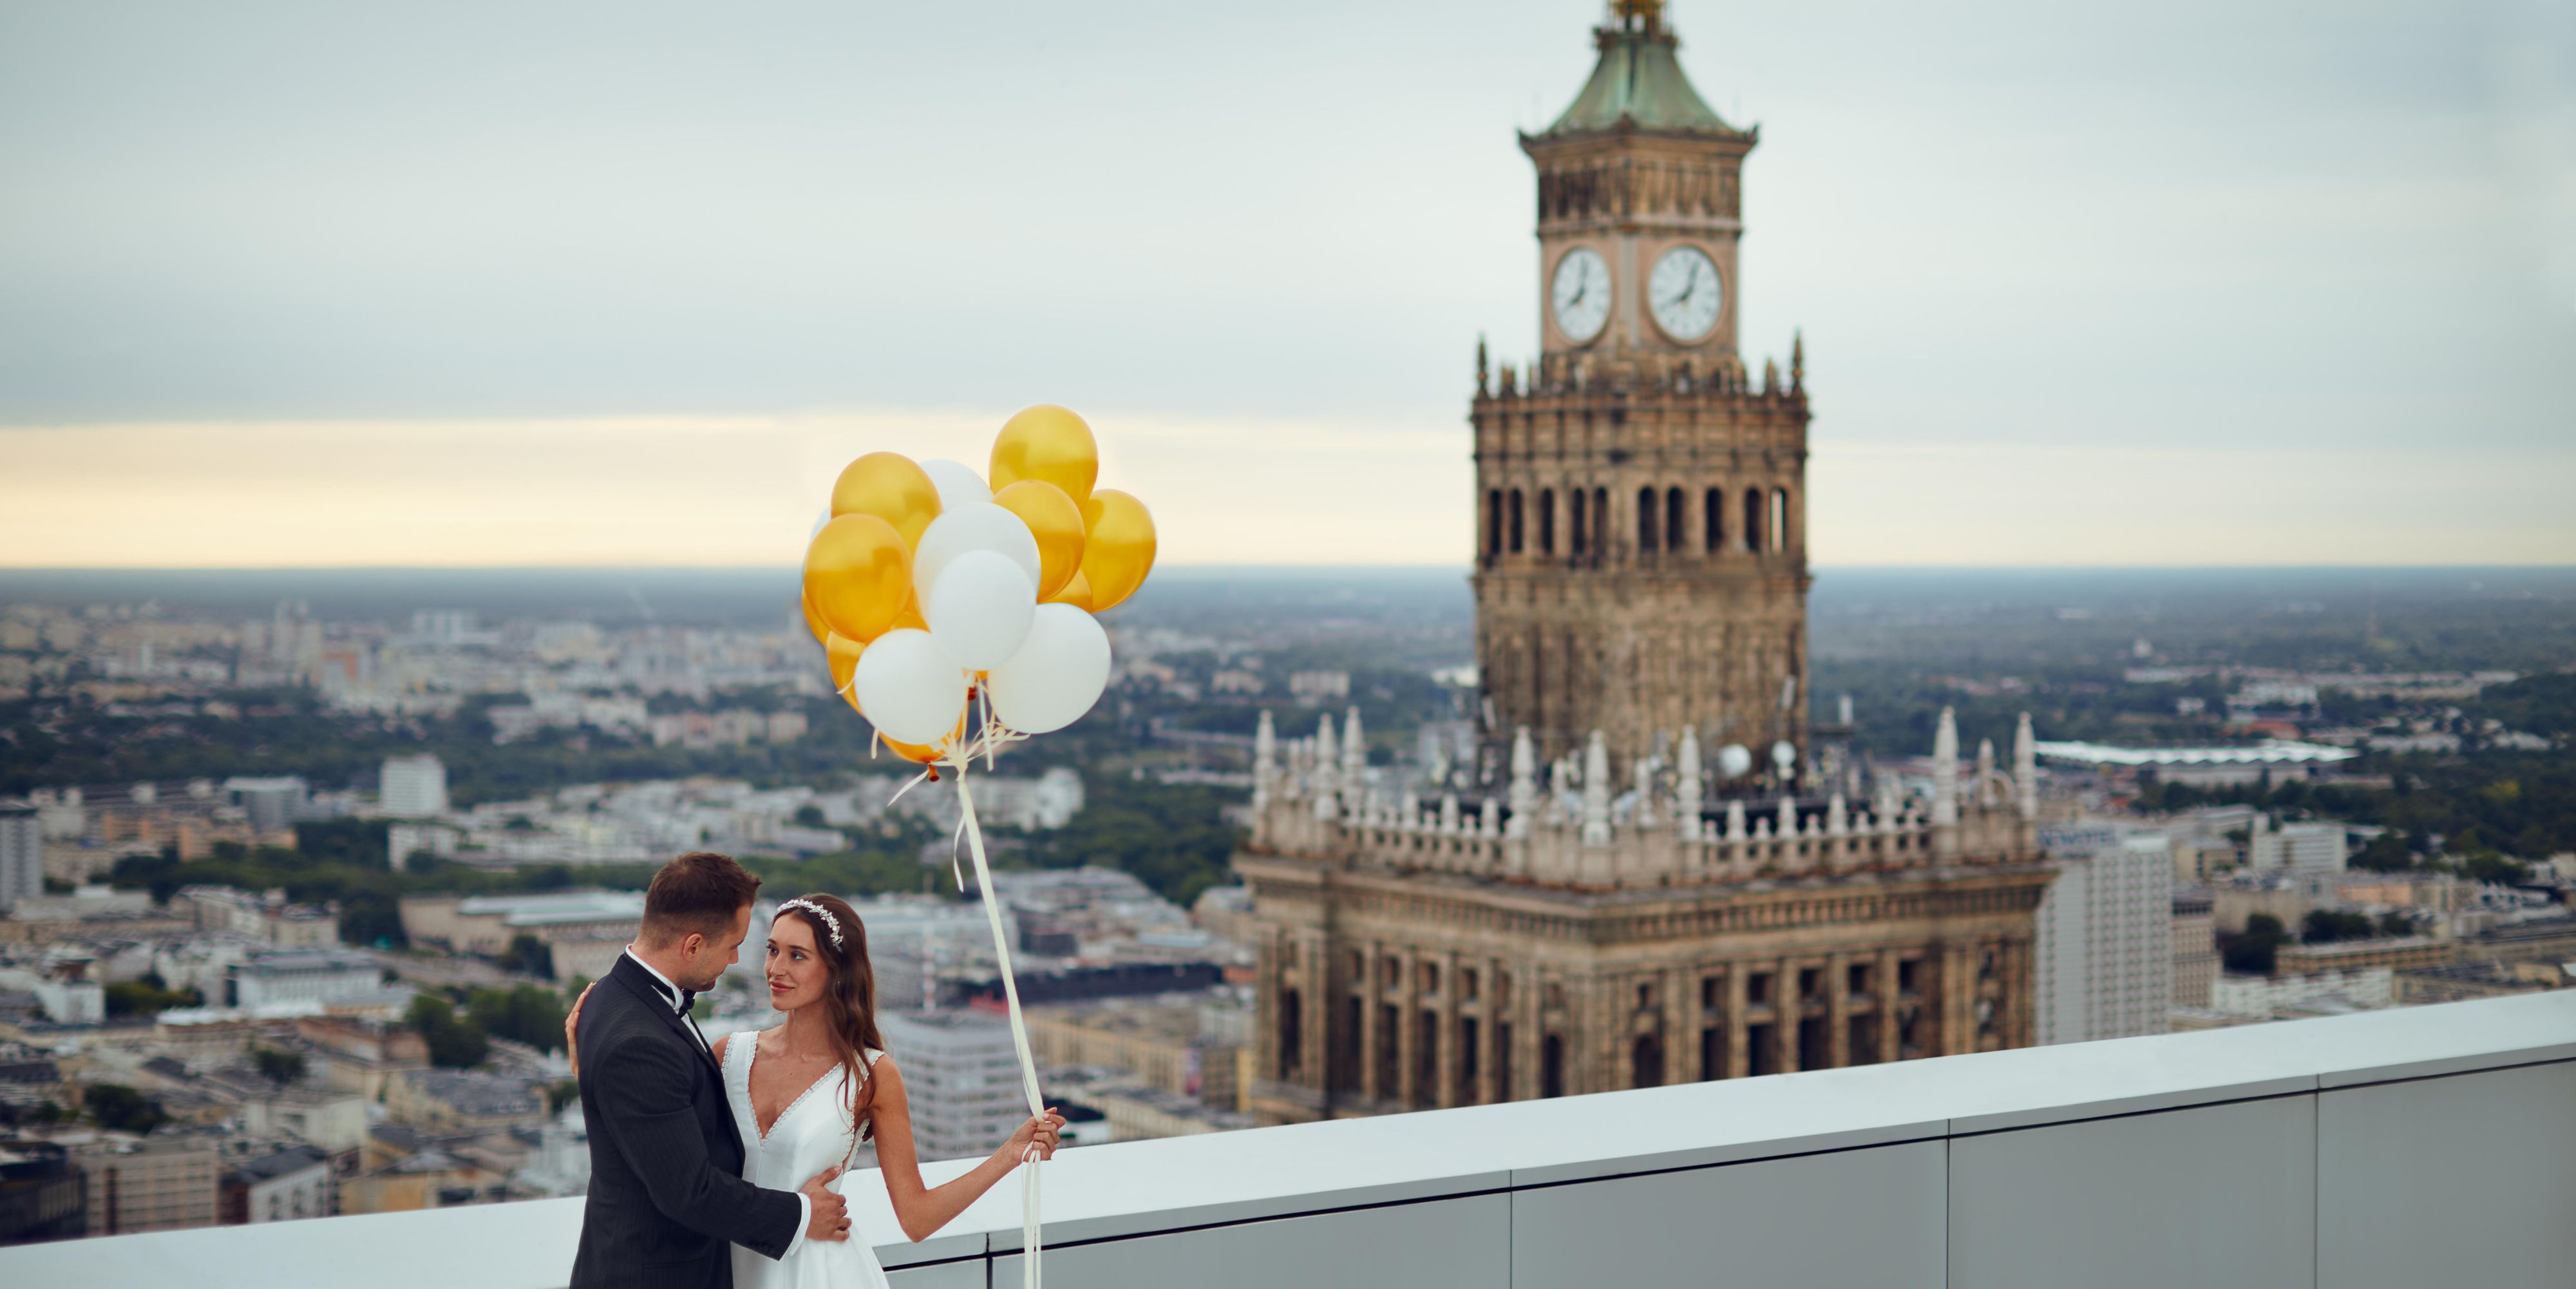 InterContinental Warsaw is a place
where your dream of a perfect wedding reception
becomes a reality. The great experience, commitment and flexibility
of our team allows us to meet the expectations
of all our customers.
We proudly present you the wedding reception offer.
